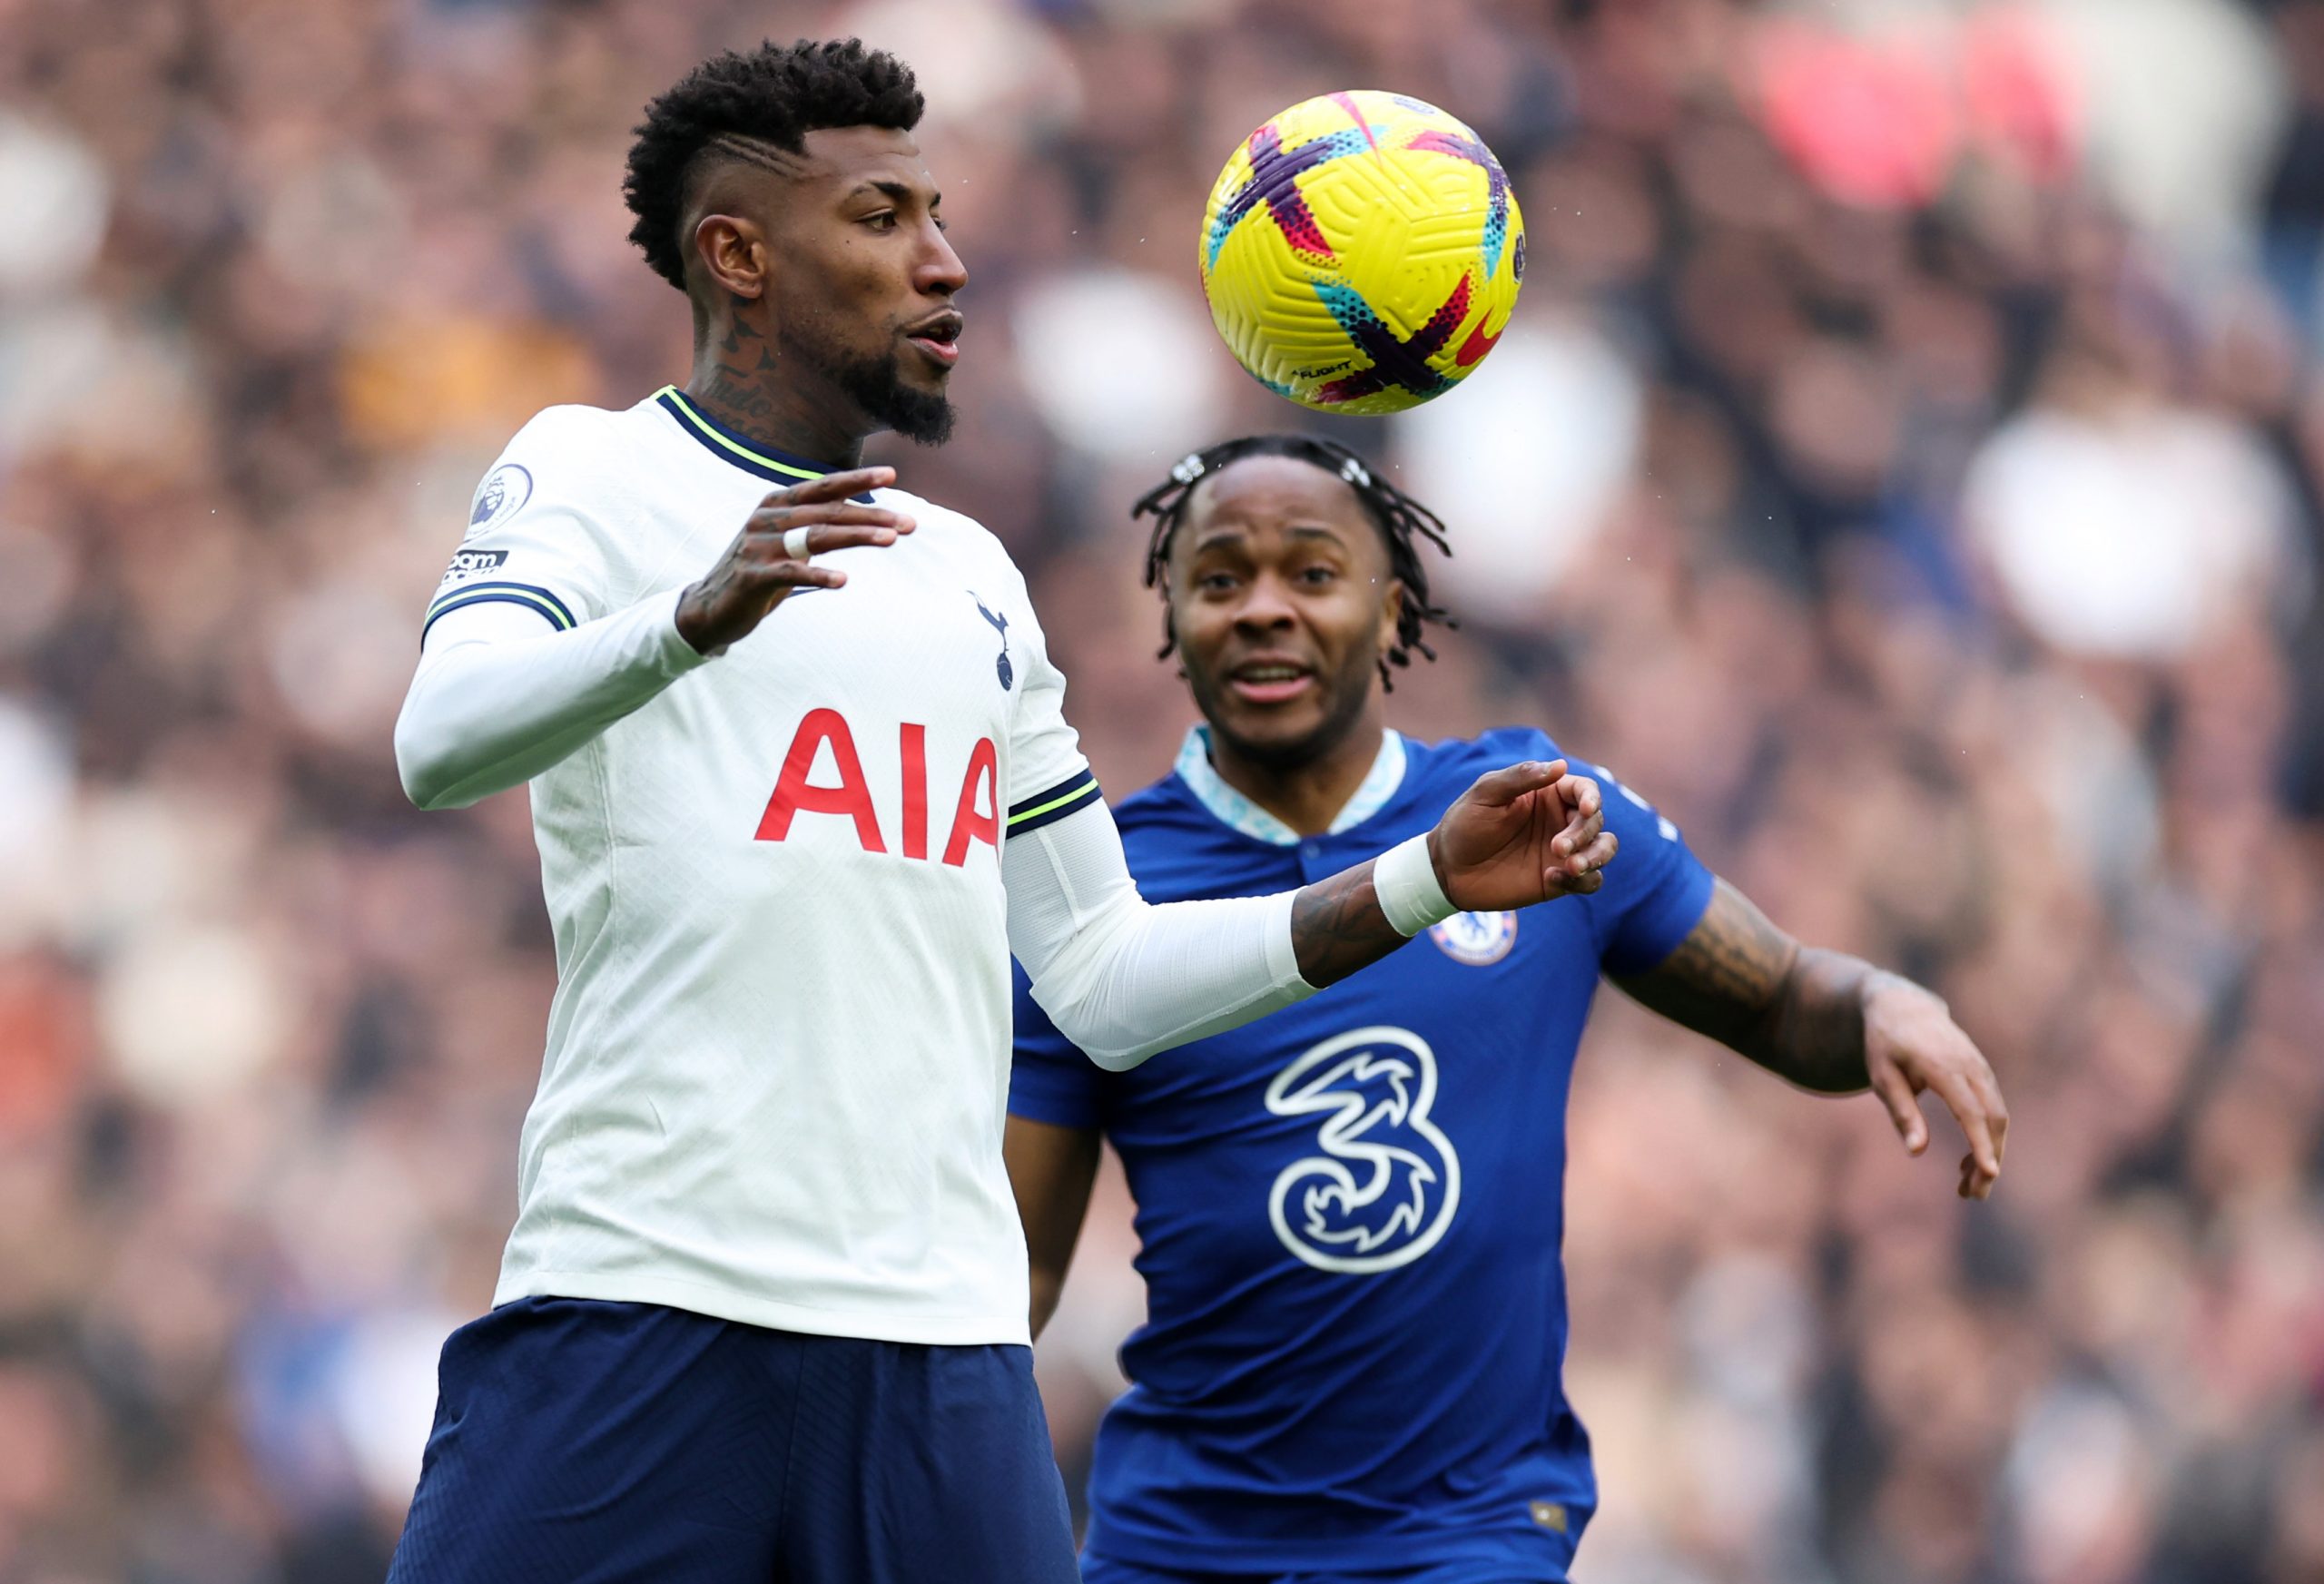 Al-Nassr now looking to sign Manchester United right-back Aaron Wan-Bissaka after Tottenham Hotspur rejected Emerson Royal bid.